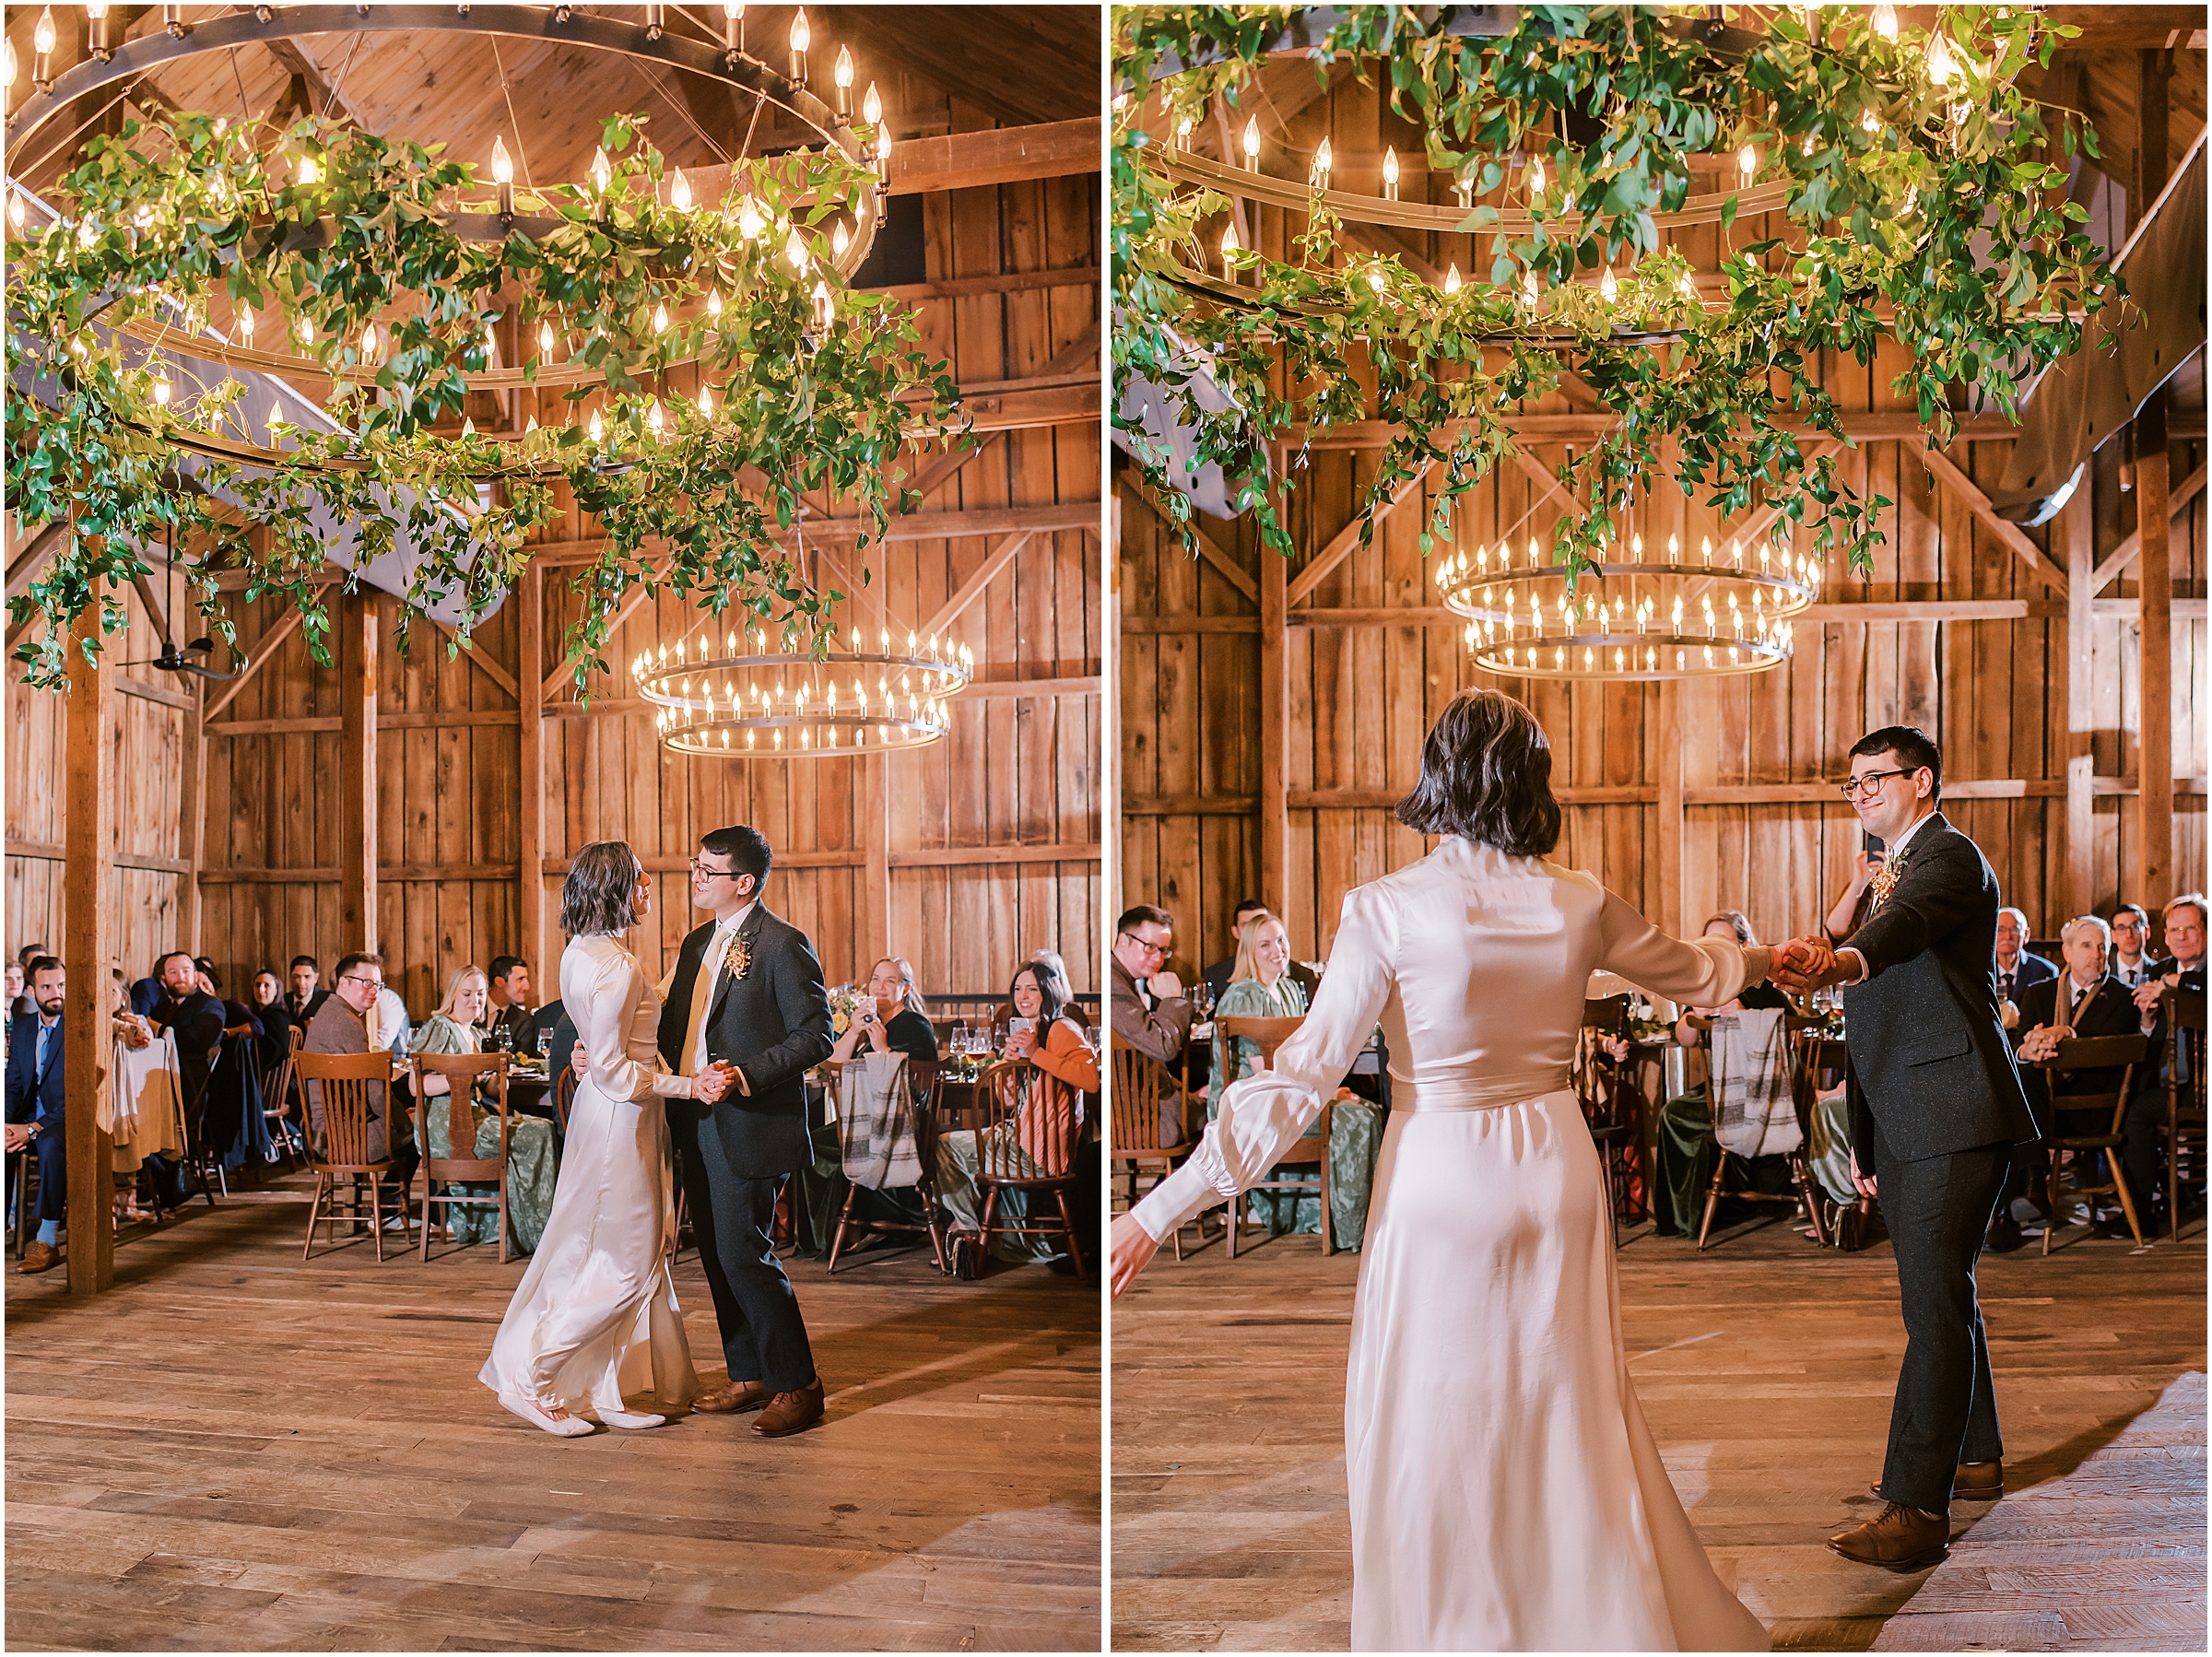 Bride and groom share first dance at Tranquility Farm